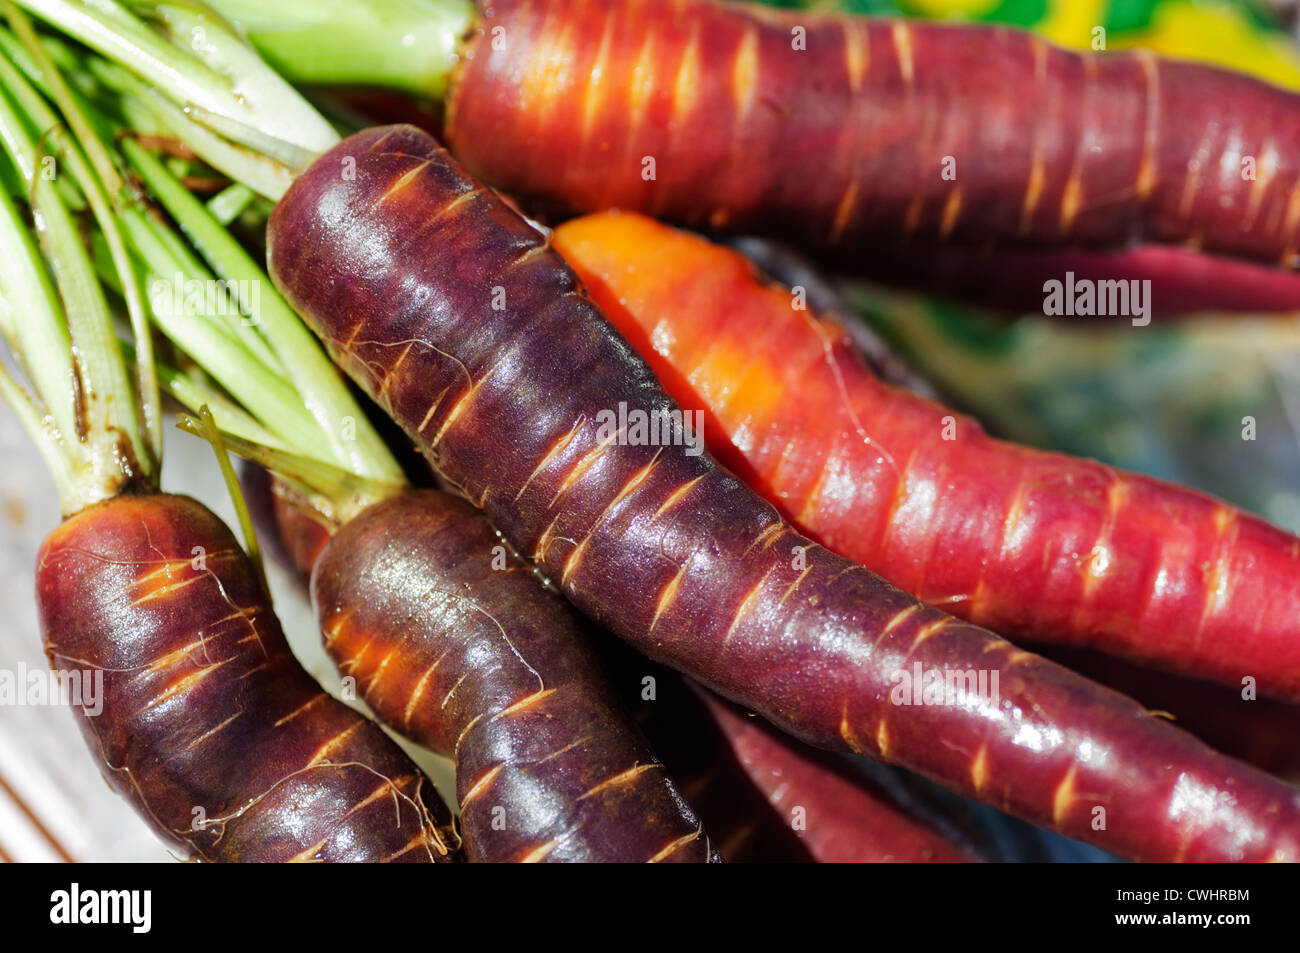 Closeup of a bunch of fresh, raw, colorful carrots in shades of orange, red, and purple on display at a farmer's market. Stock Photo